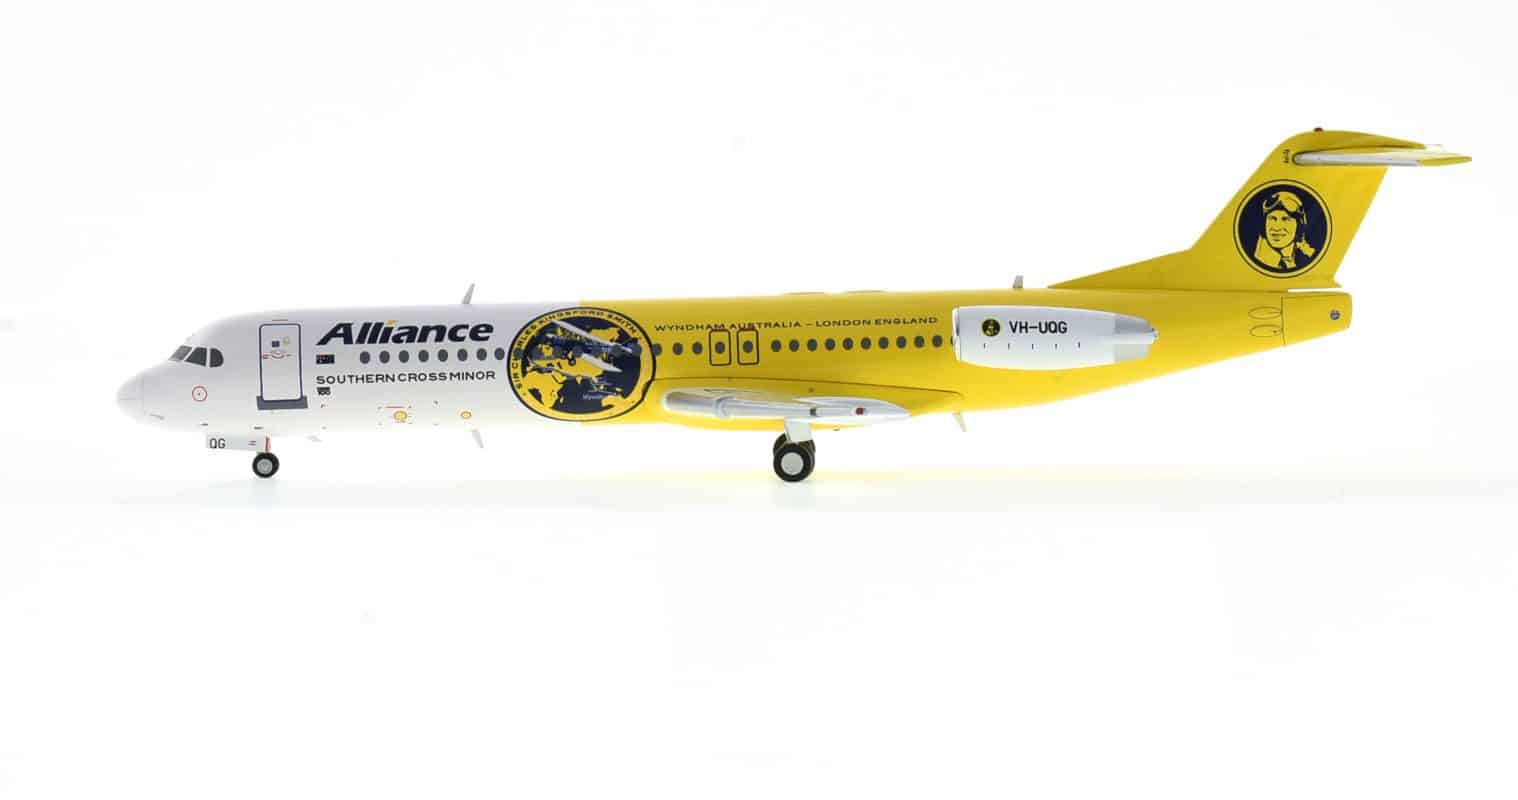 Port side view of Gemini Jets G2UTY987 - 1/200 scale diecast model of the Fokker 100, registration VH-UQG in Alliance Airlines 